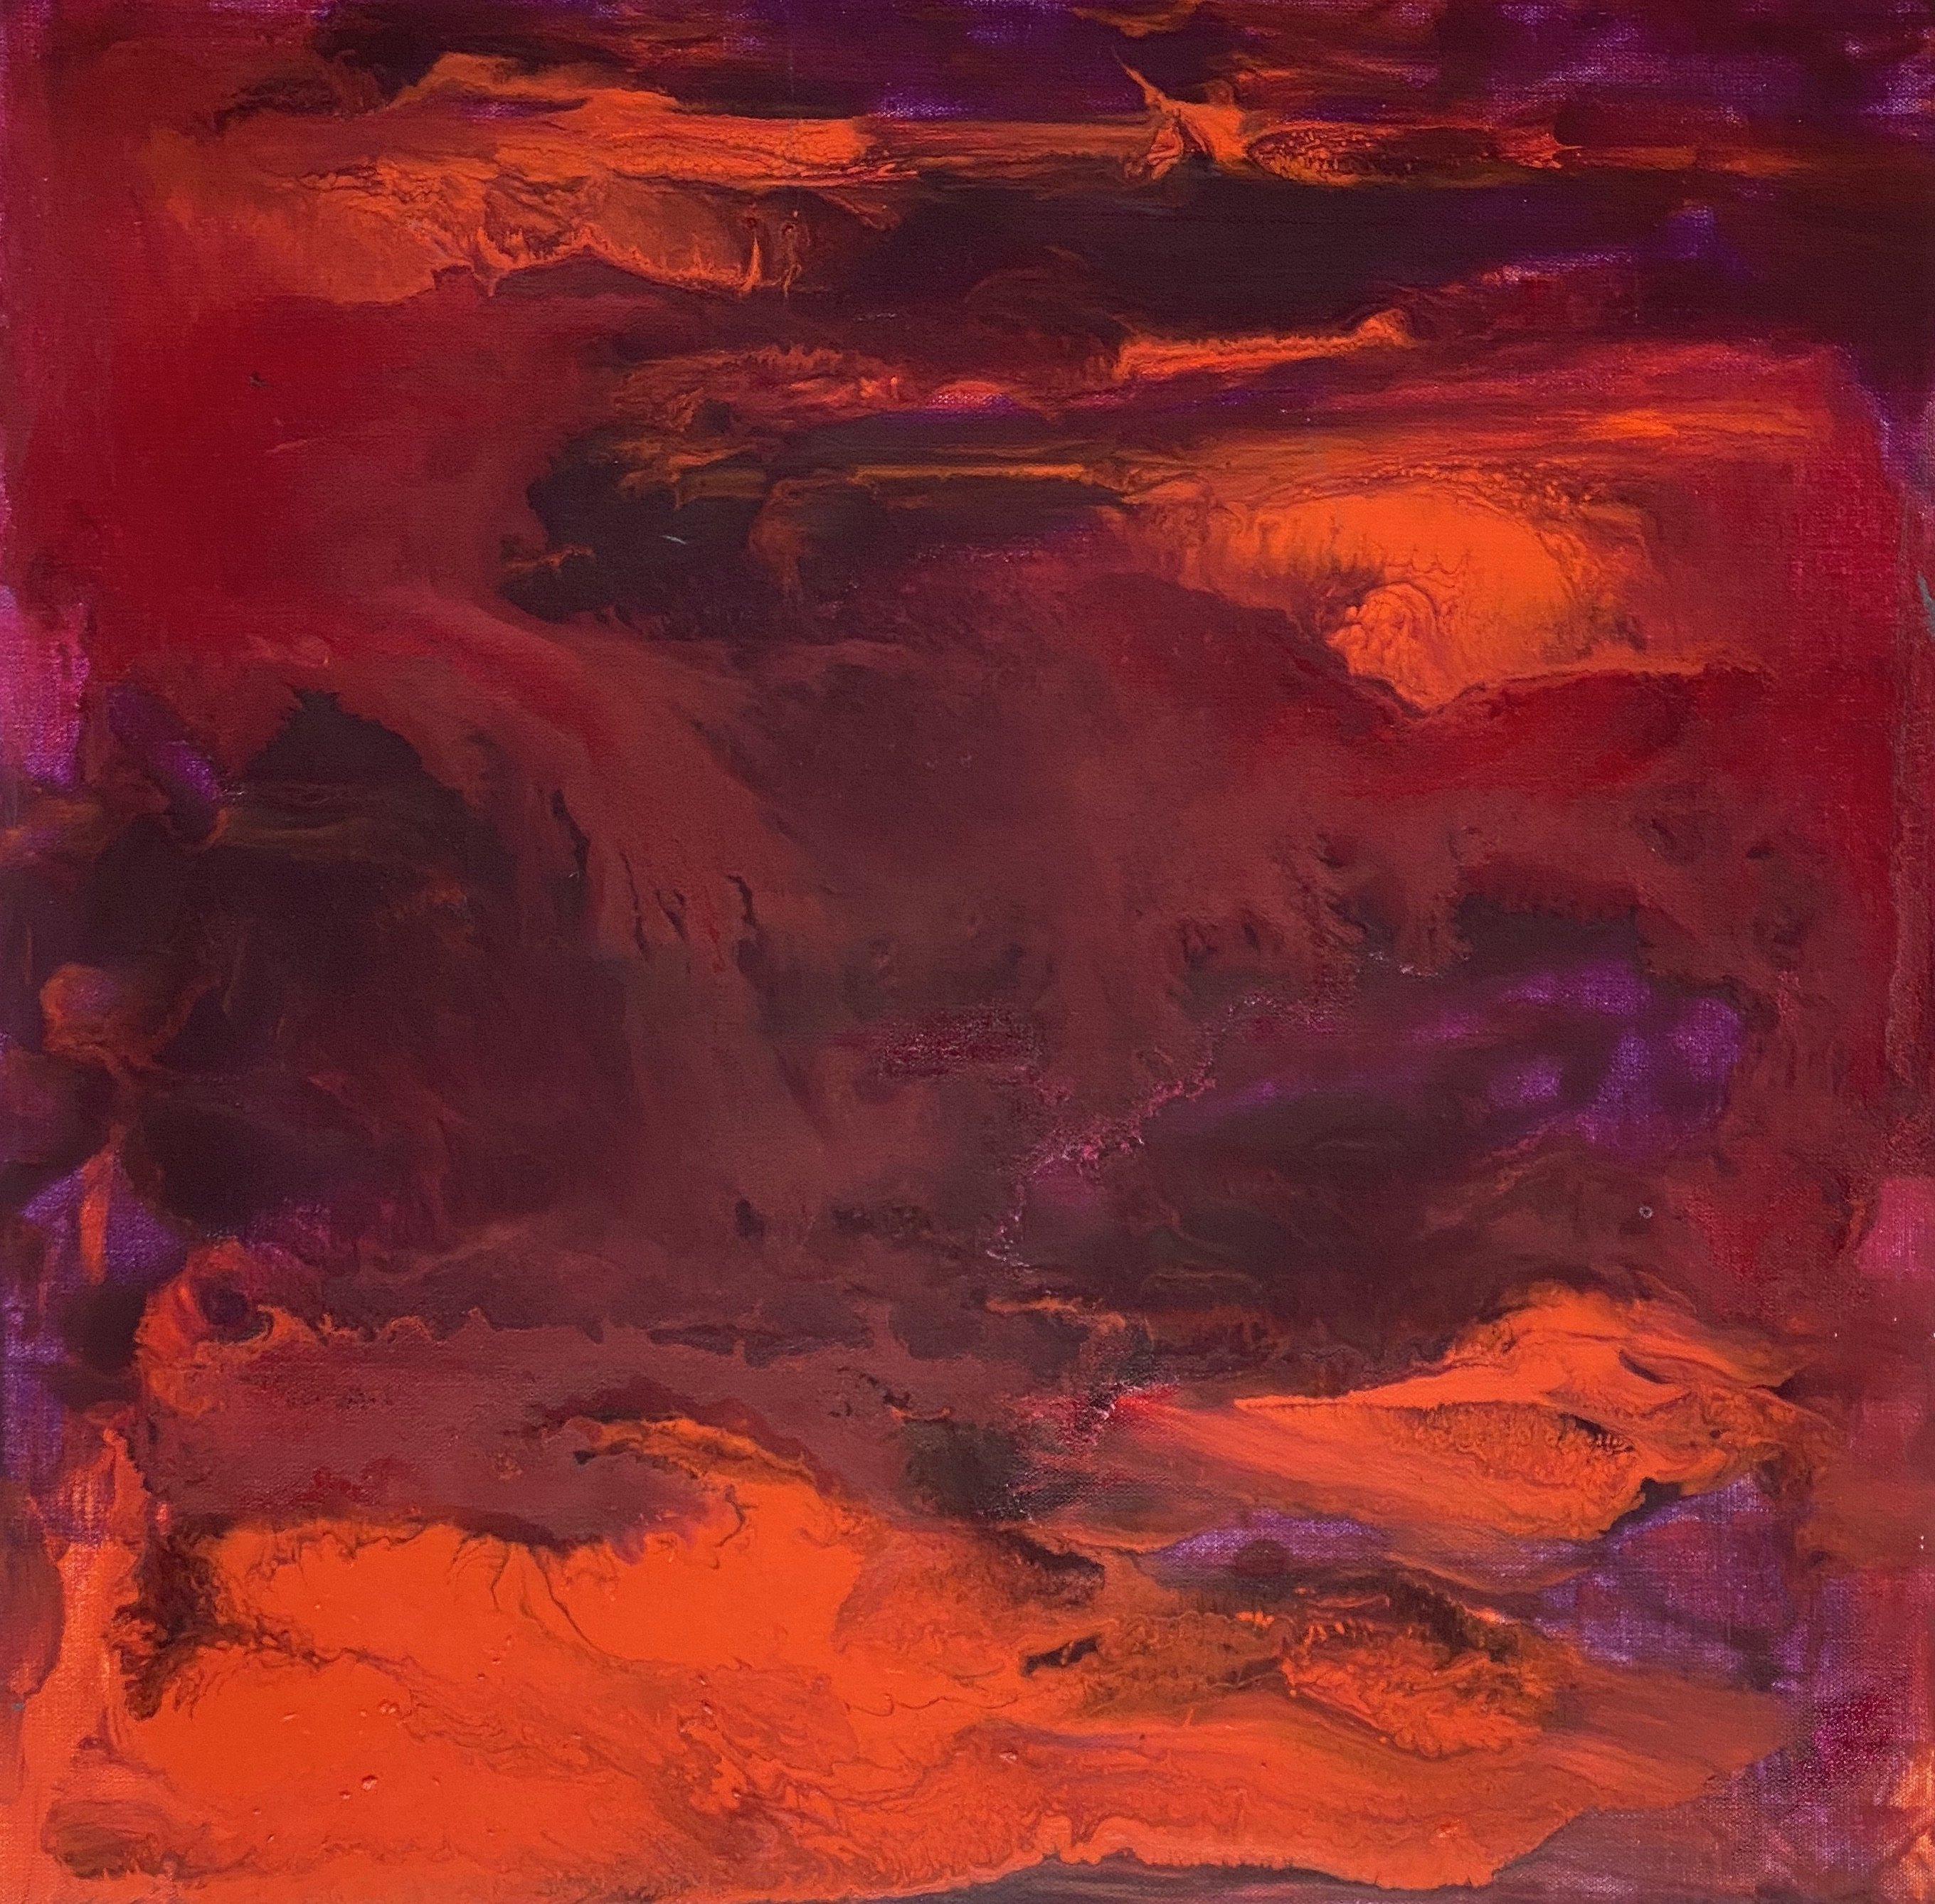 Juanita Bellavance  Abstract Painting - Sailor's delight, Contemporary painting with bold reds, oranges and violets